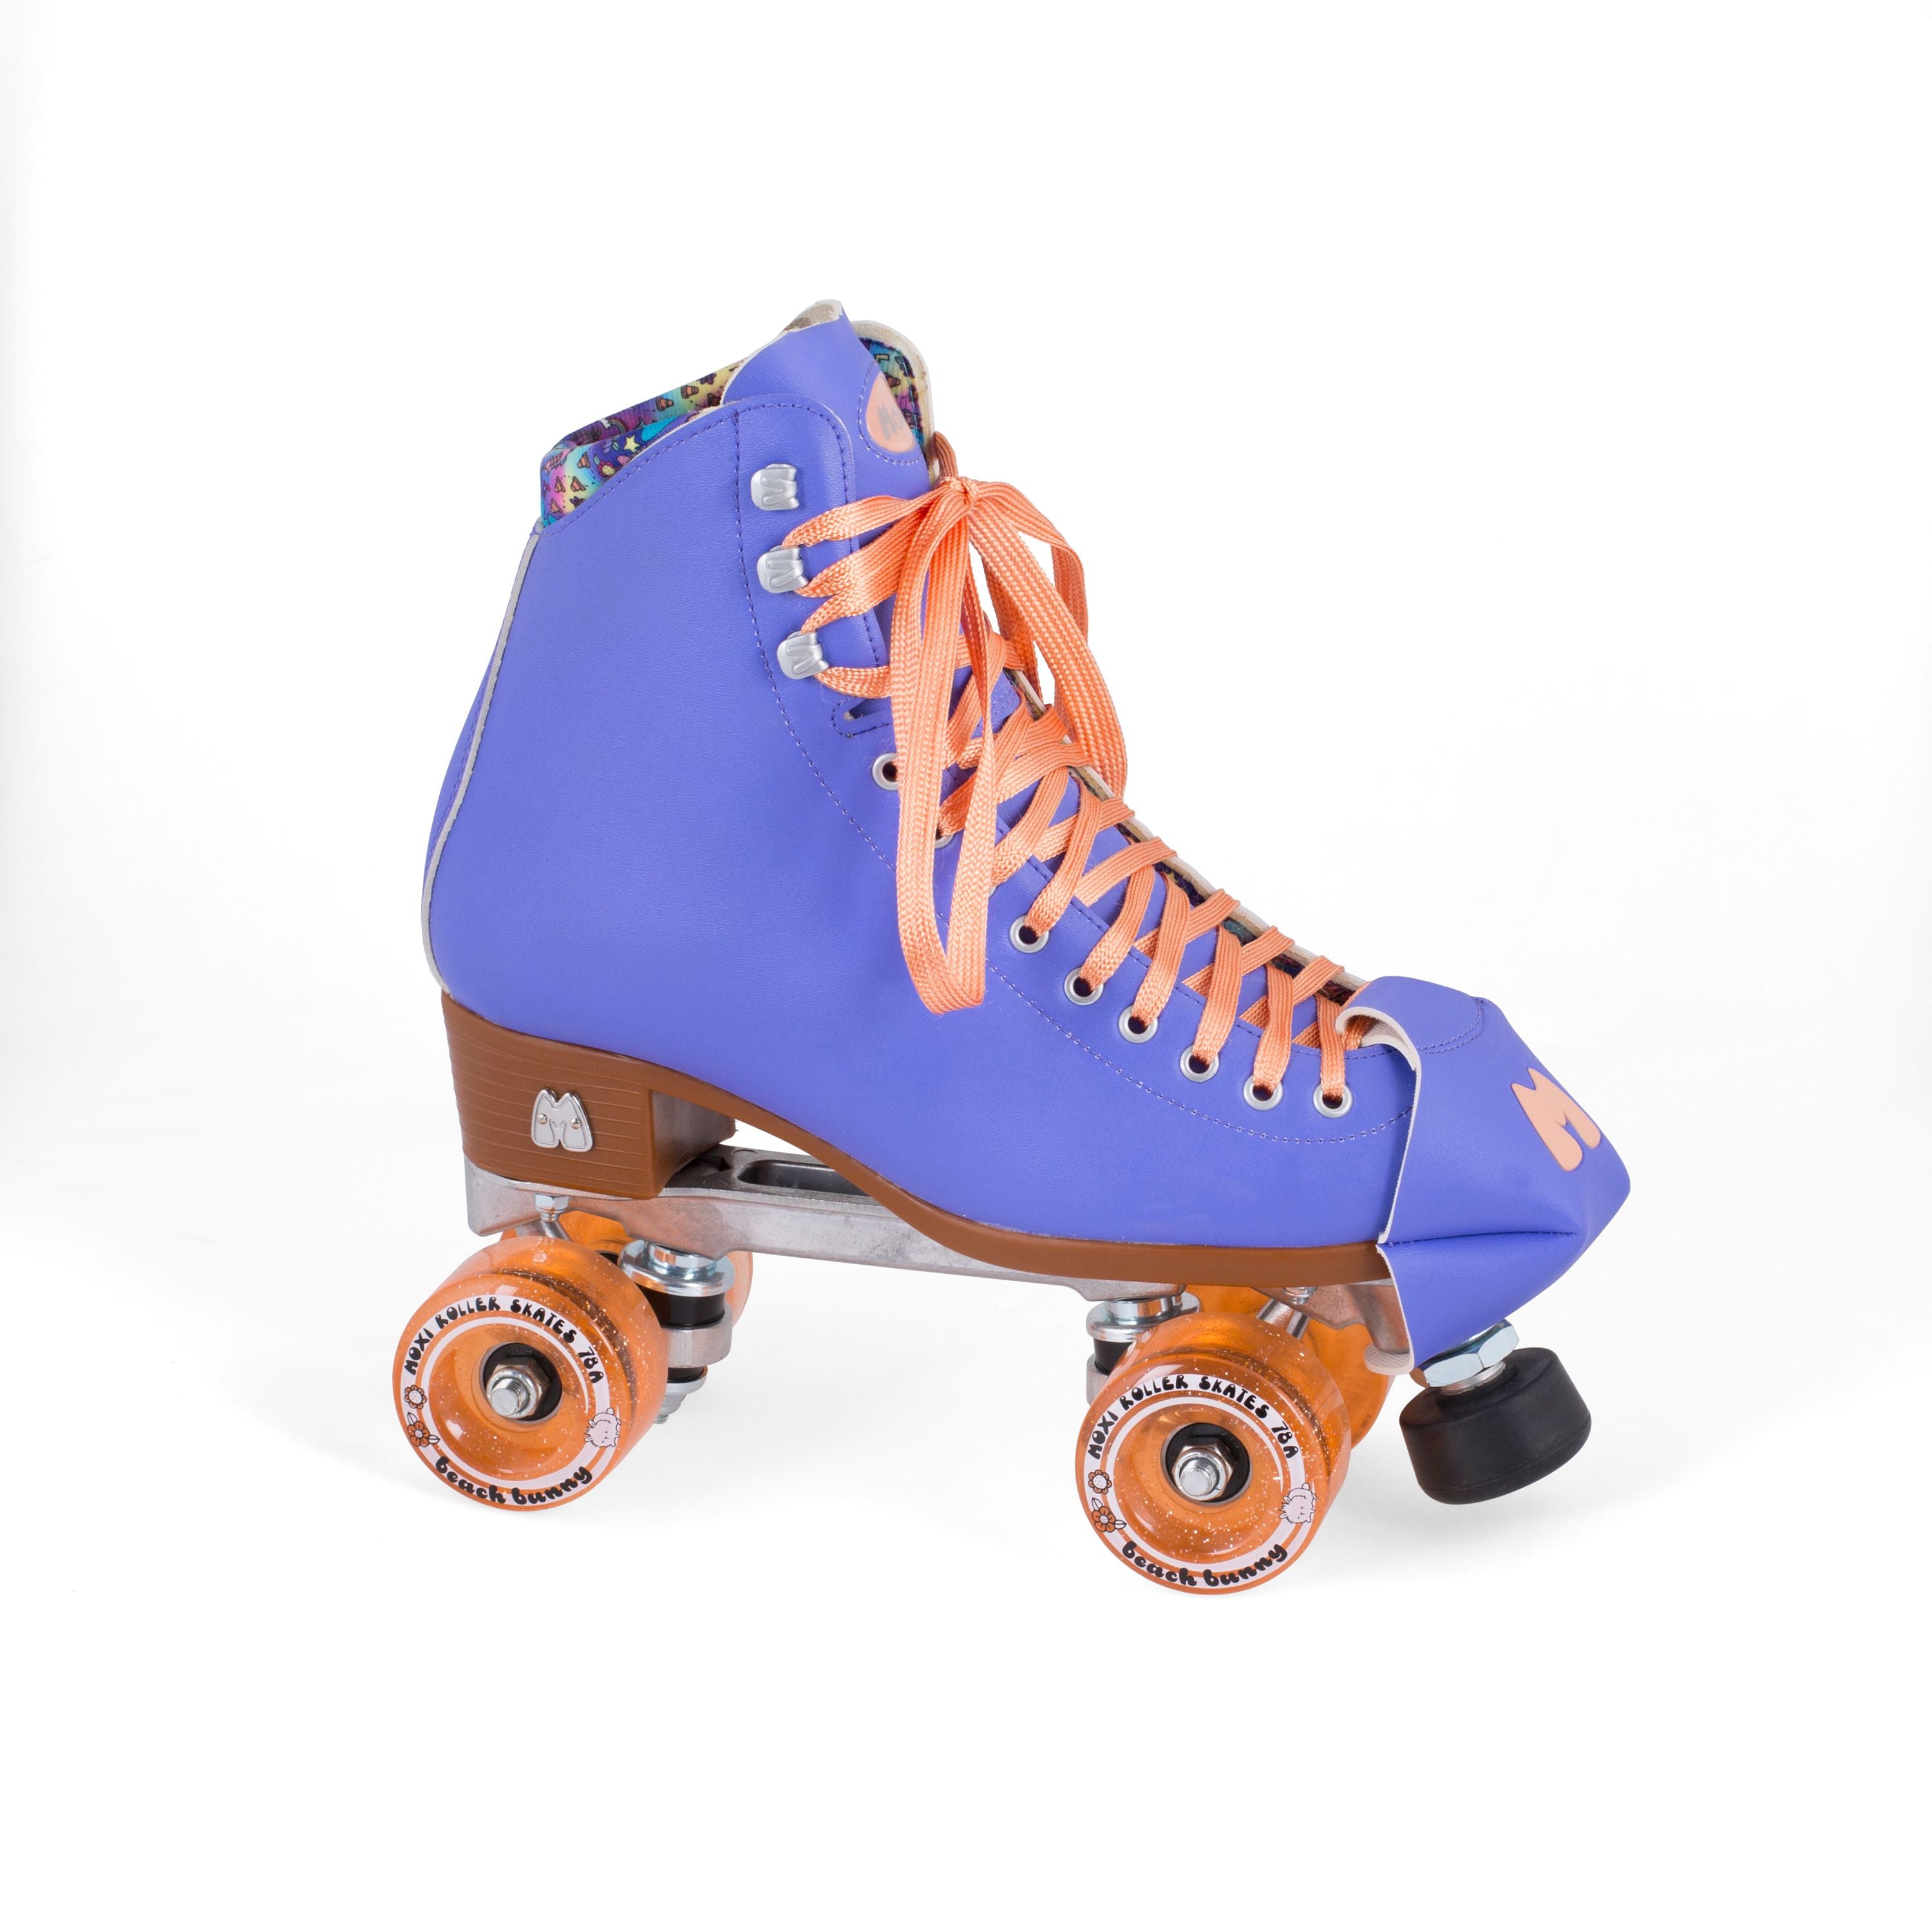 The Rainbow Rider features a reliable boot made of vinyl uppers and a ...